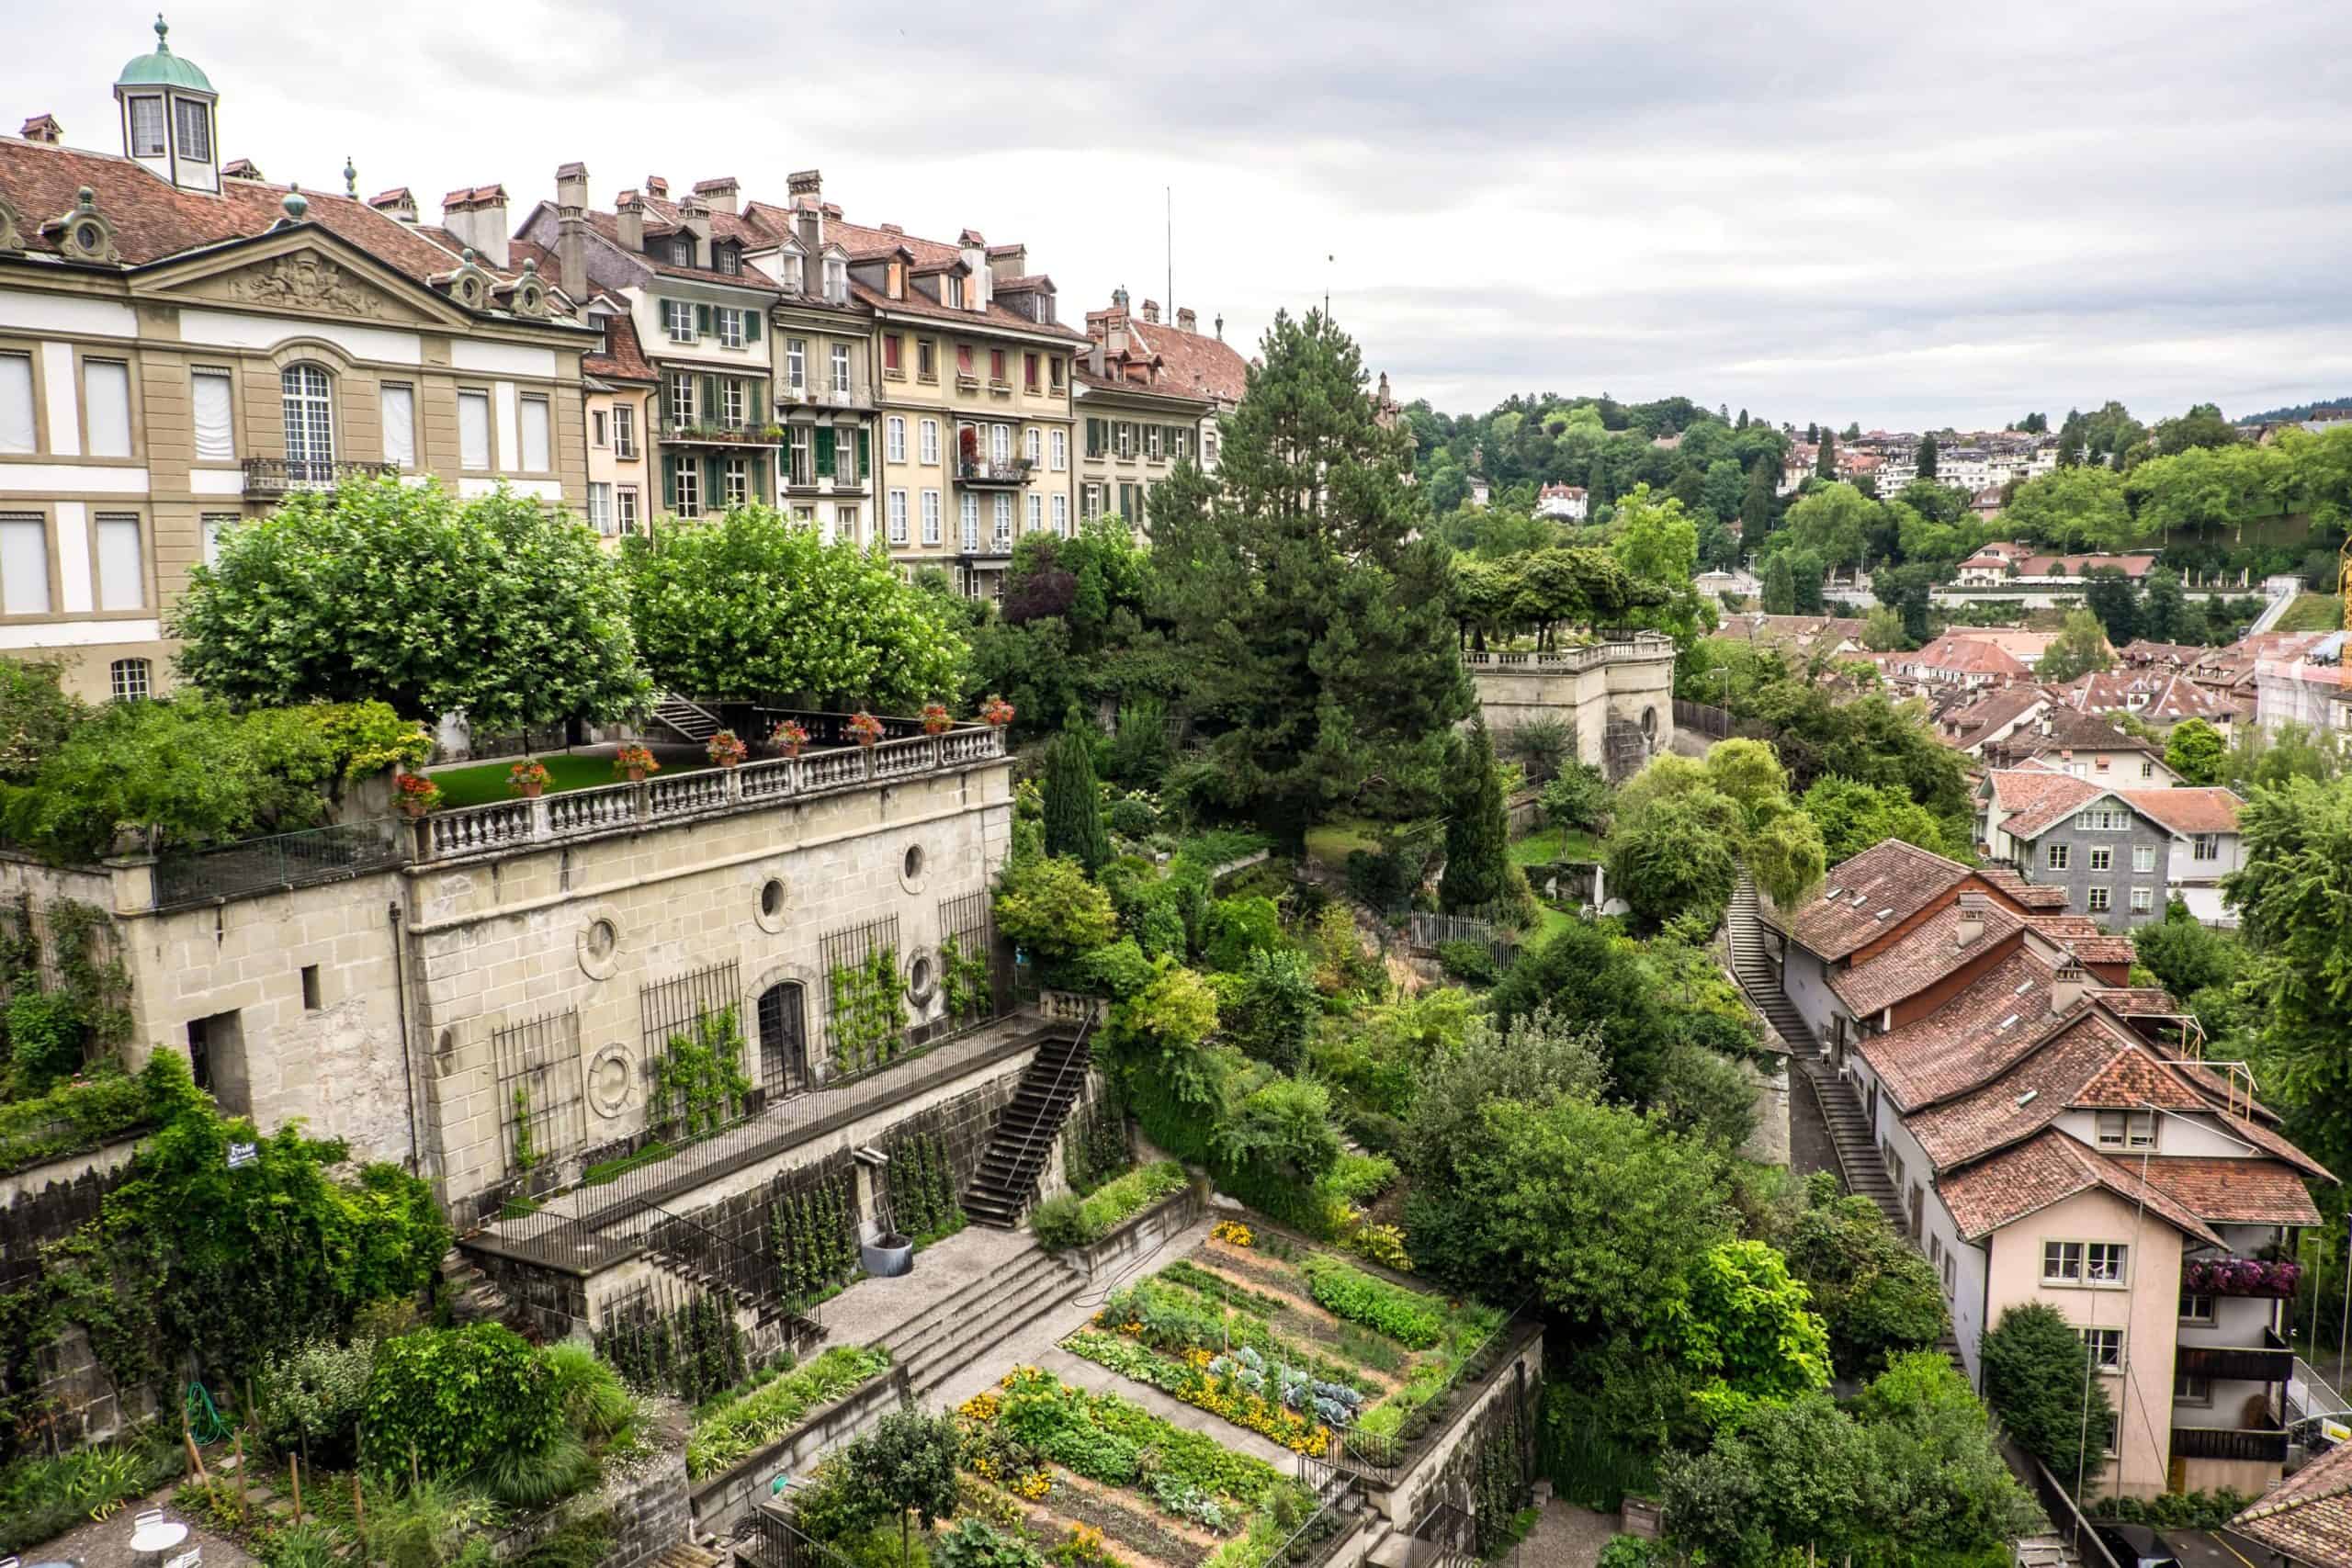 The red-roofed houses and manicured gardens of residential area of Bern, Switzerland